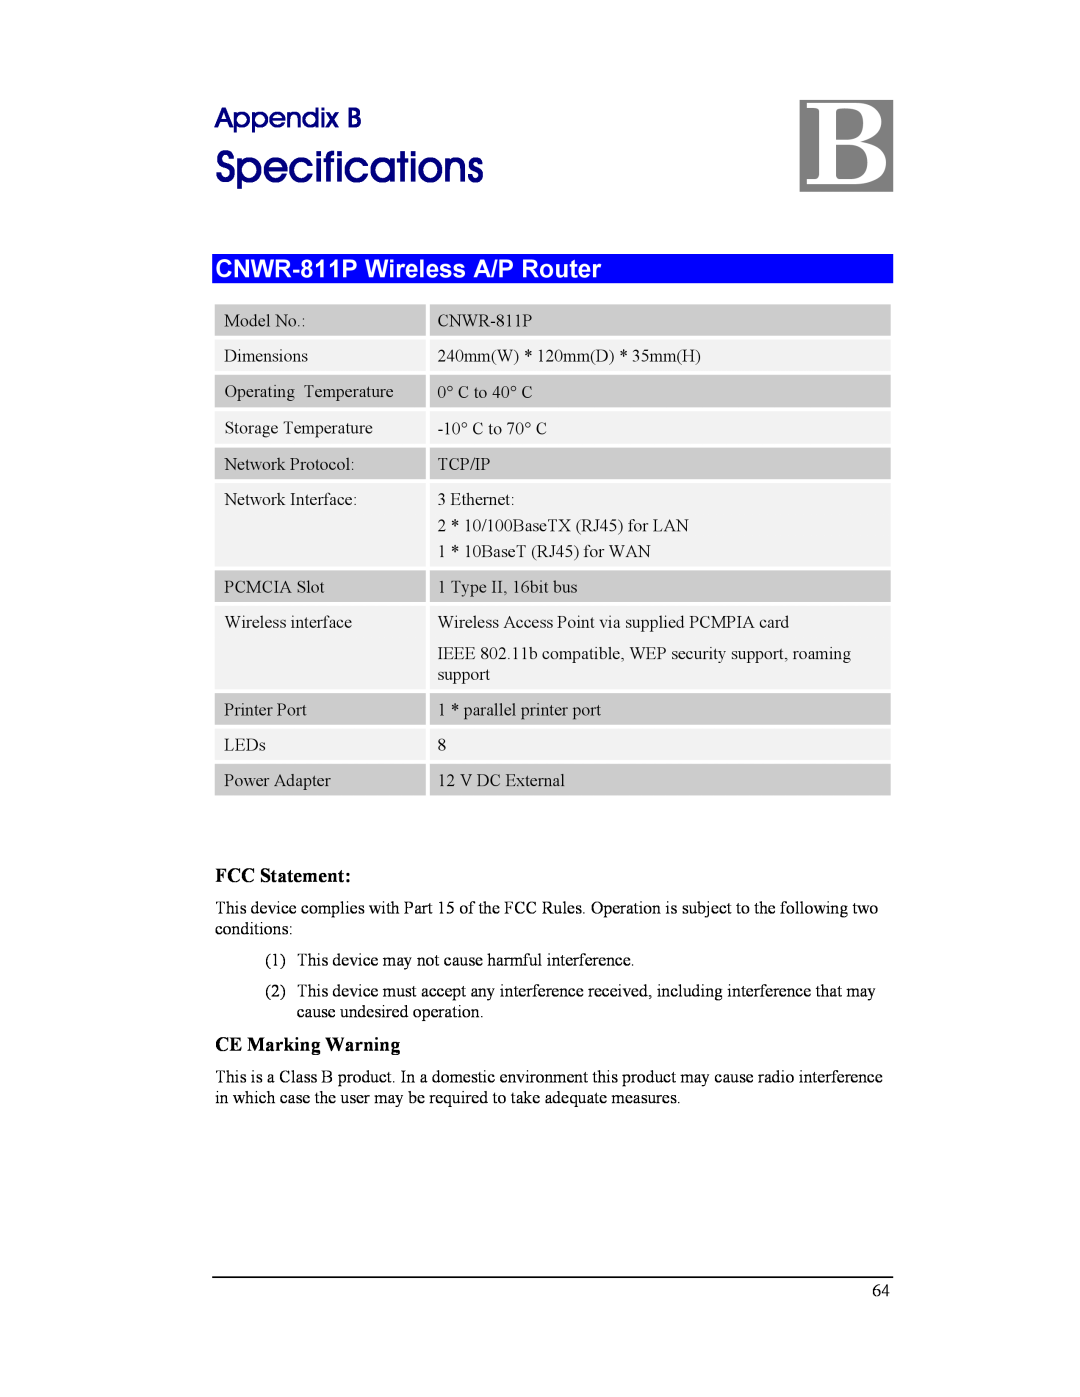 CNET manual Specifications, Appendix B, CNWR-811P Wireless A/P Router, FCC Statement, CE Marking Warning 